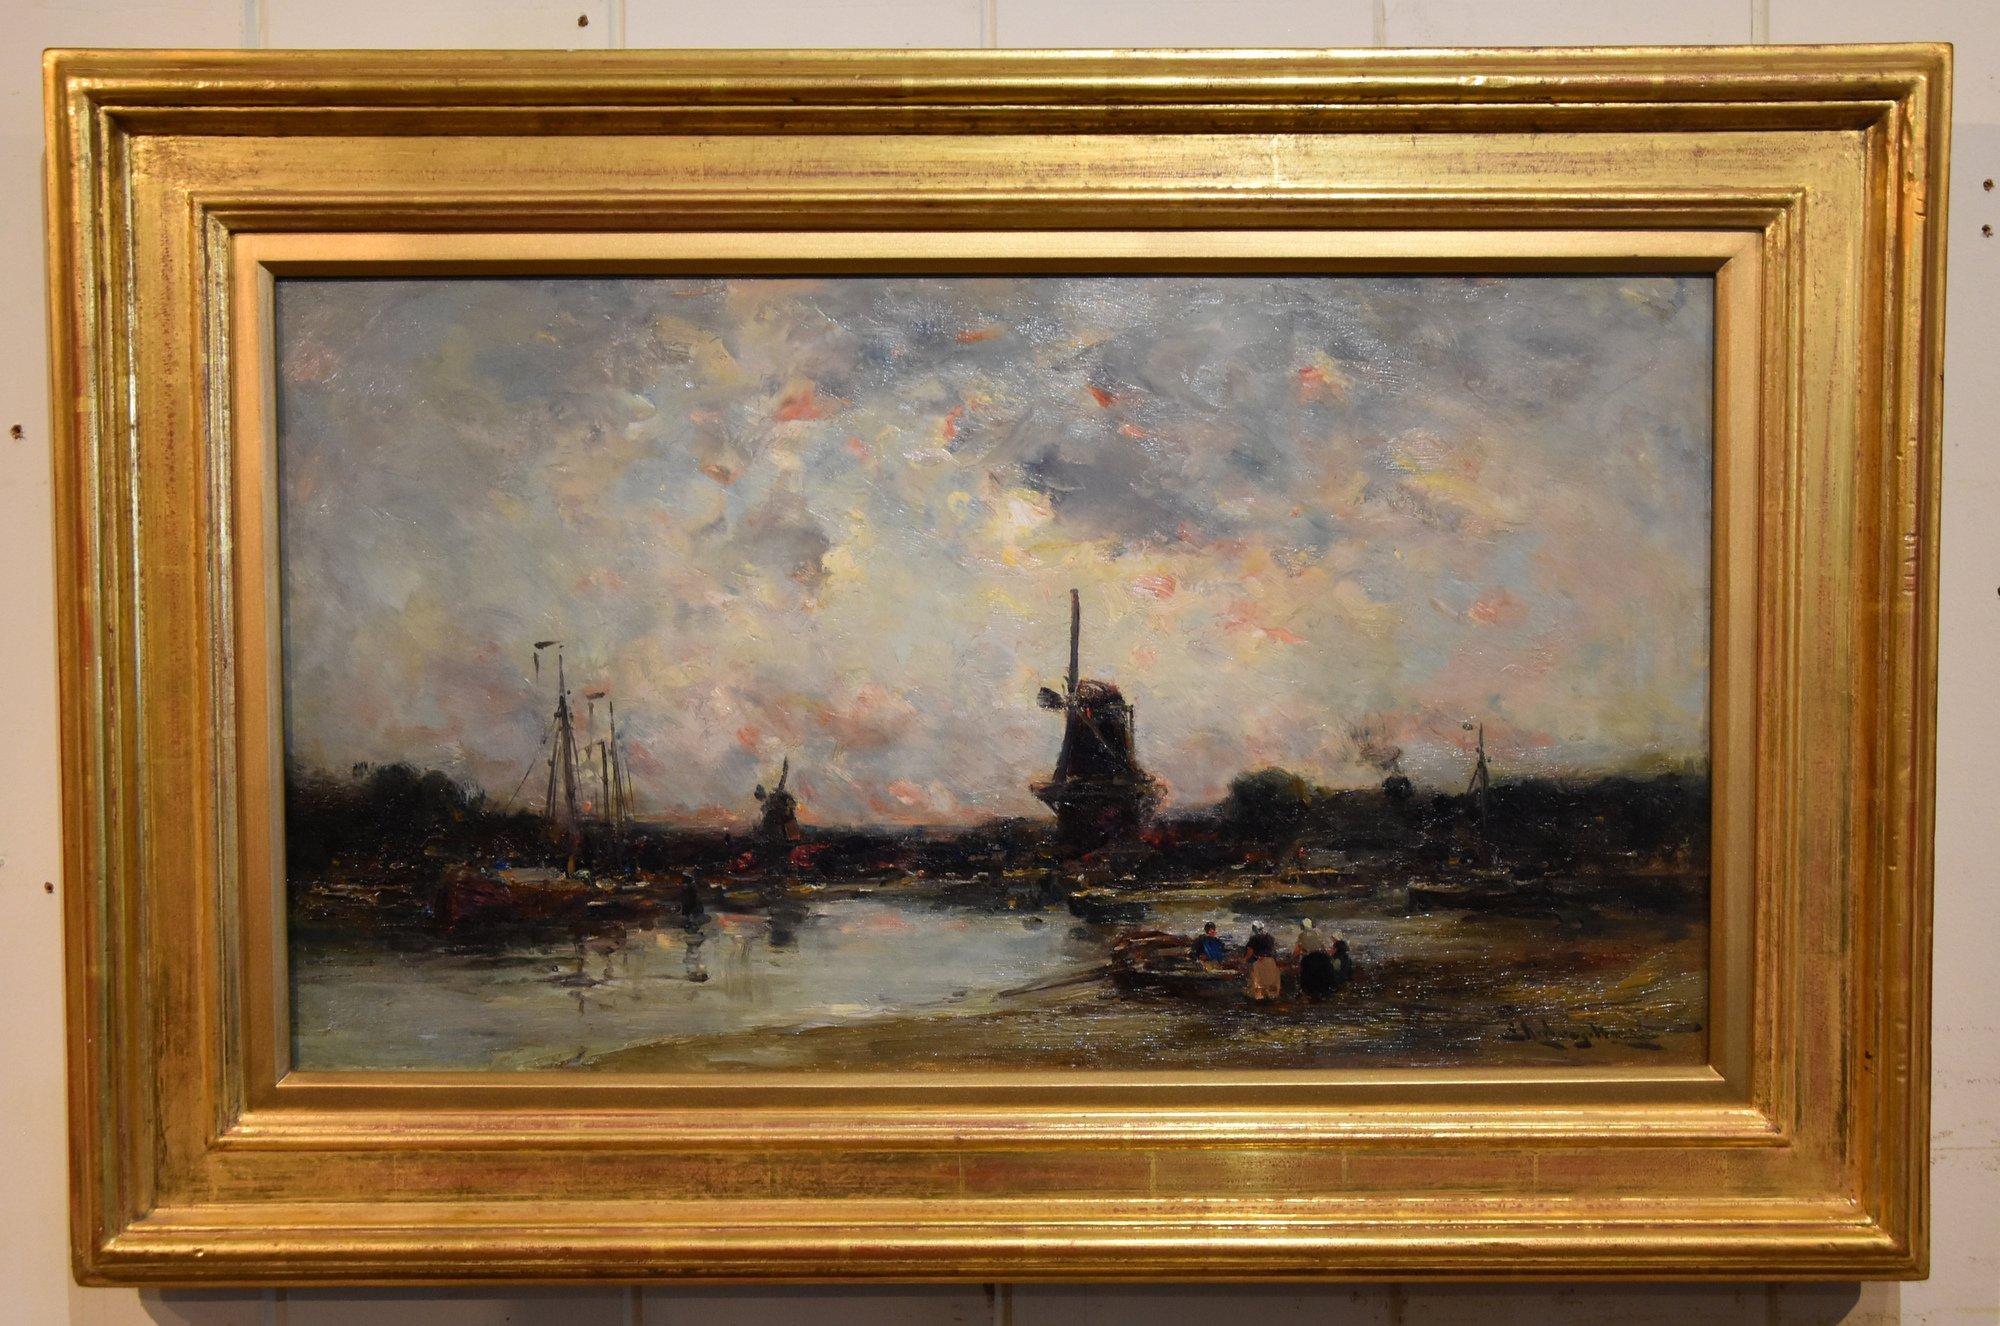 Oil Painting by Edmund Aubrey Hunt "A Dutch Estuary, Evening"  1855 - 1922 Massachusetts painter who studied under Gerome in Paris who then settled in London Exhibited at the Royal Academy Boston, Paris salon, New English Art Club and Royal Society